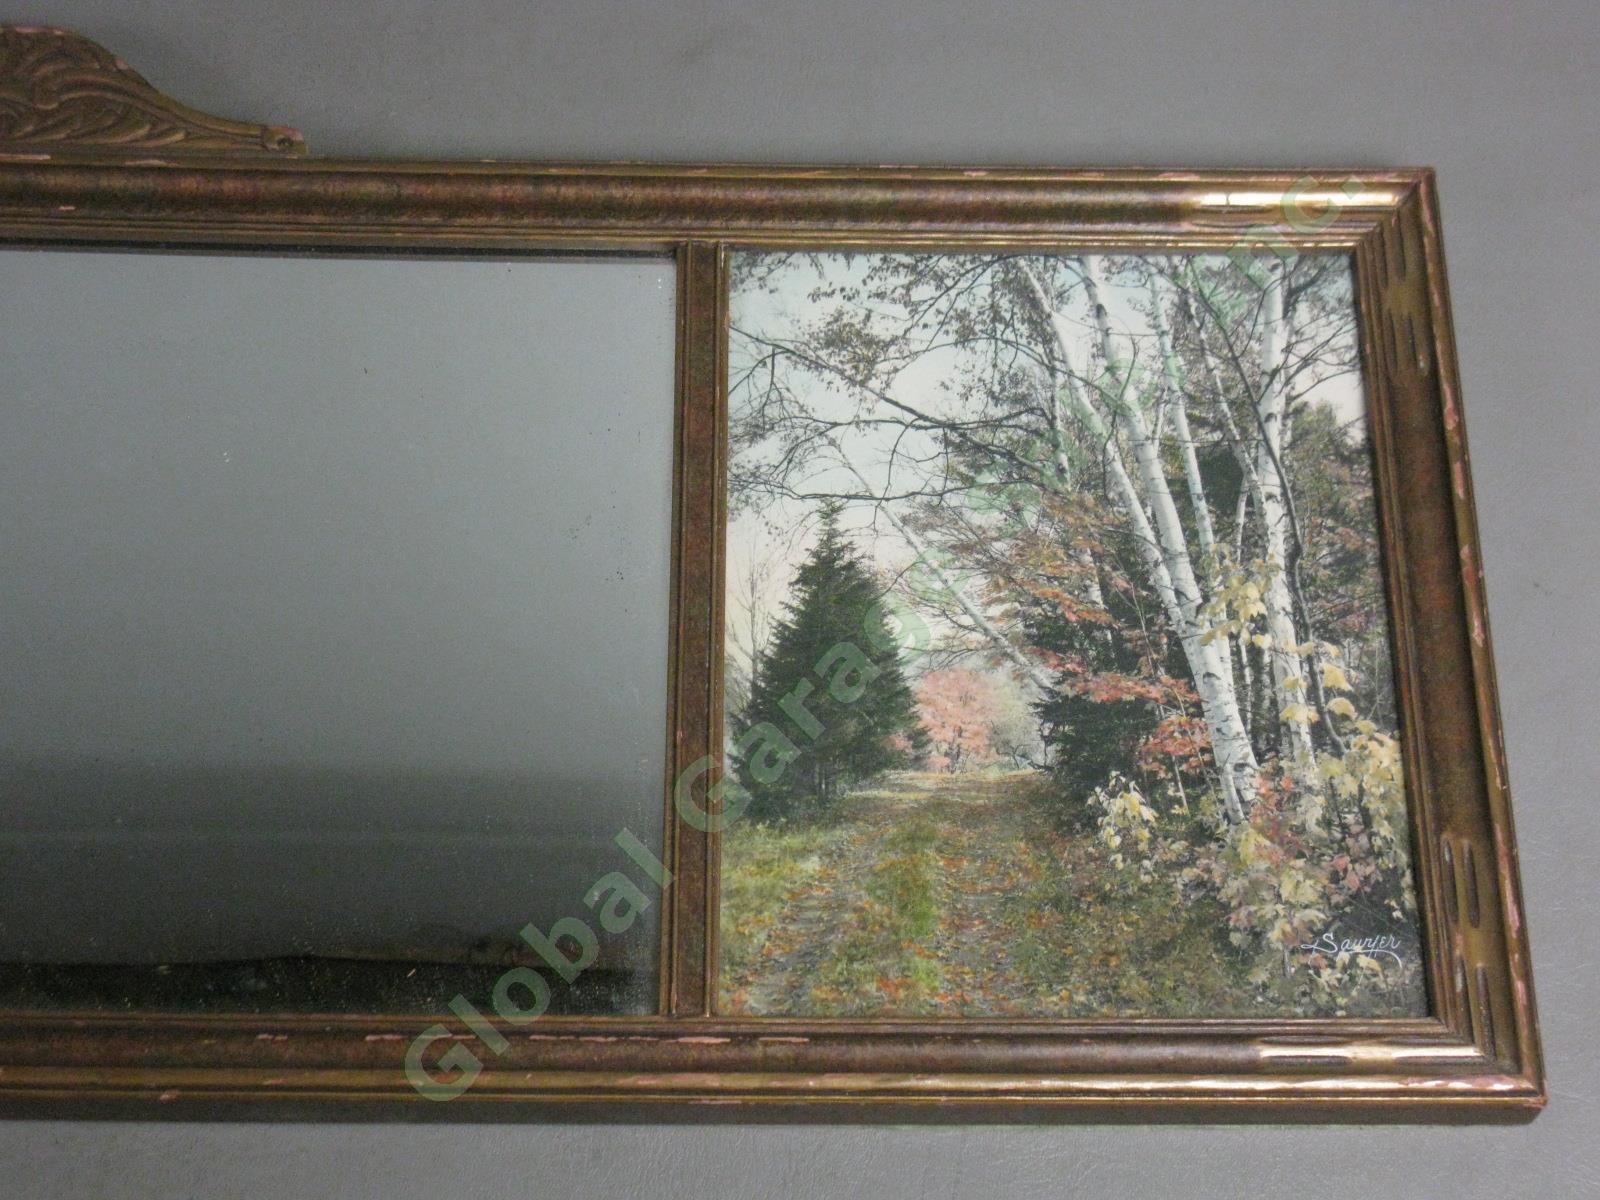 Antique 1920s Wall Mirror Charles Sawyer Hand Colored Photos Franconia Notch NH 2